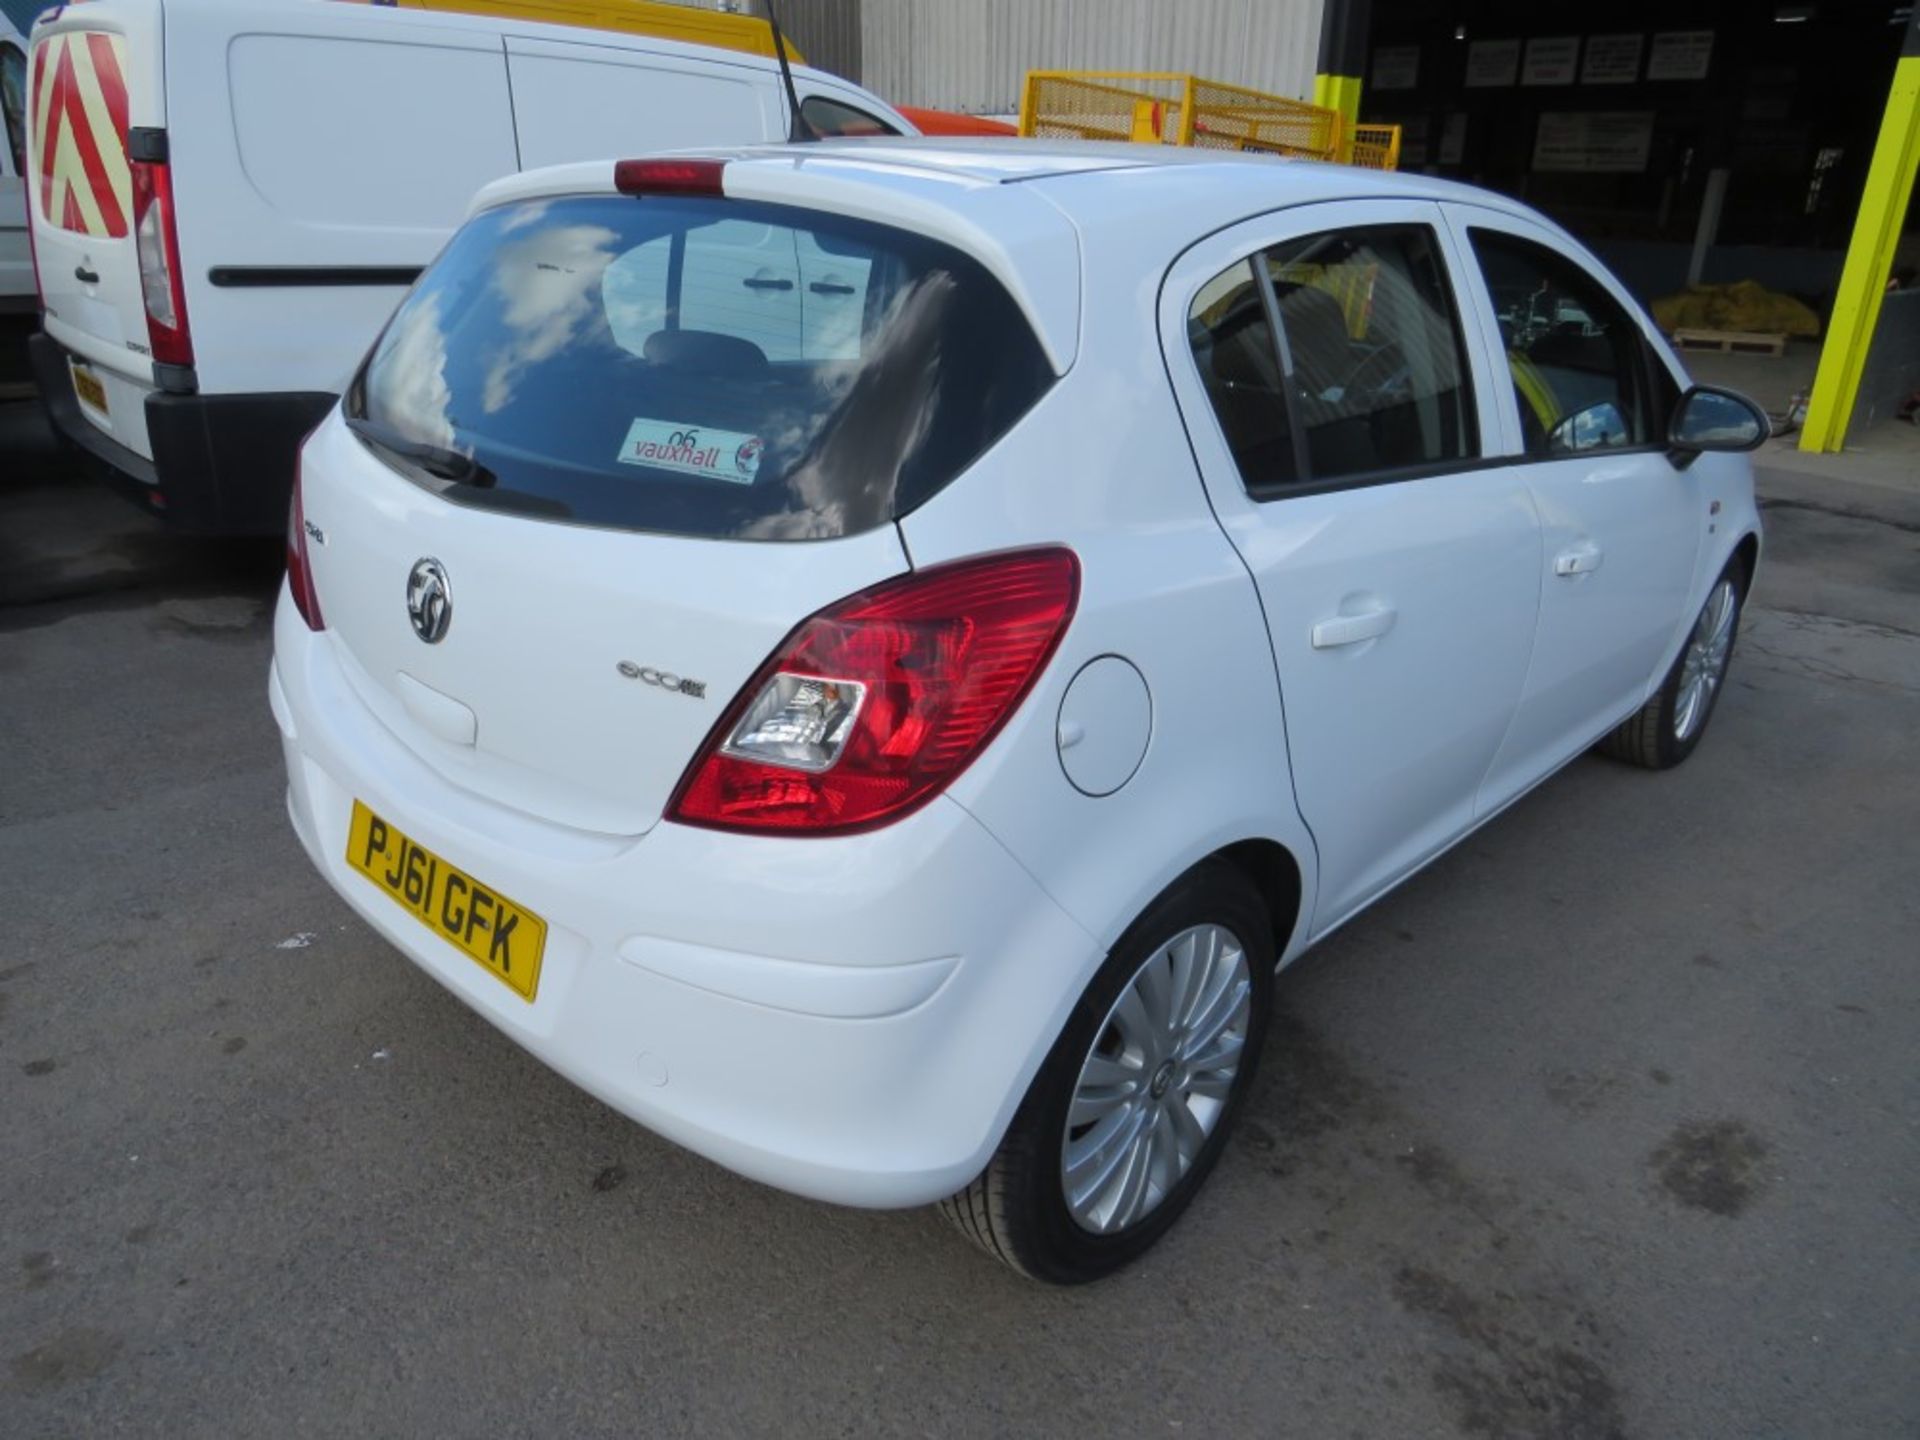 61 reg VAUXHALL CORSA EXCITE ECOLFEX 1.0 HATCHBACK (RUNS & DRIVES BUT ENGINE & HEAD GASKET FAULTS) - Image 4 of 6